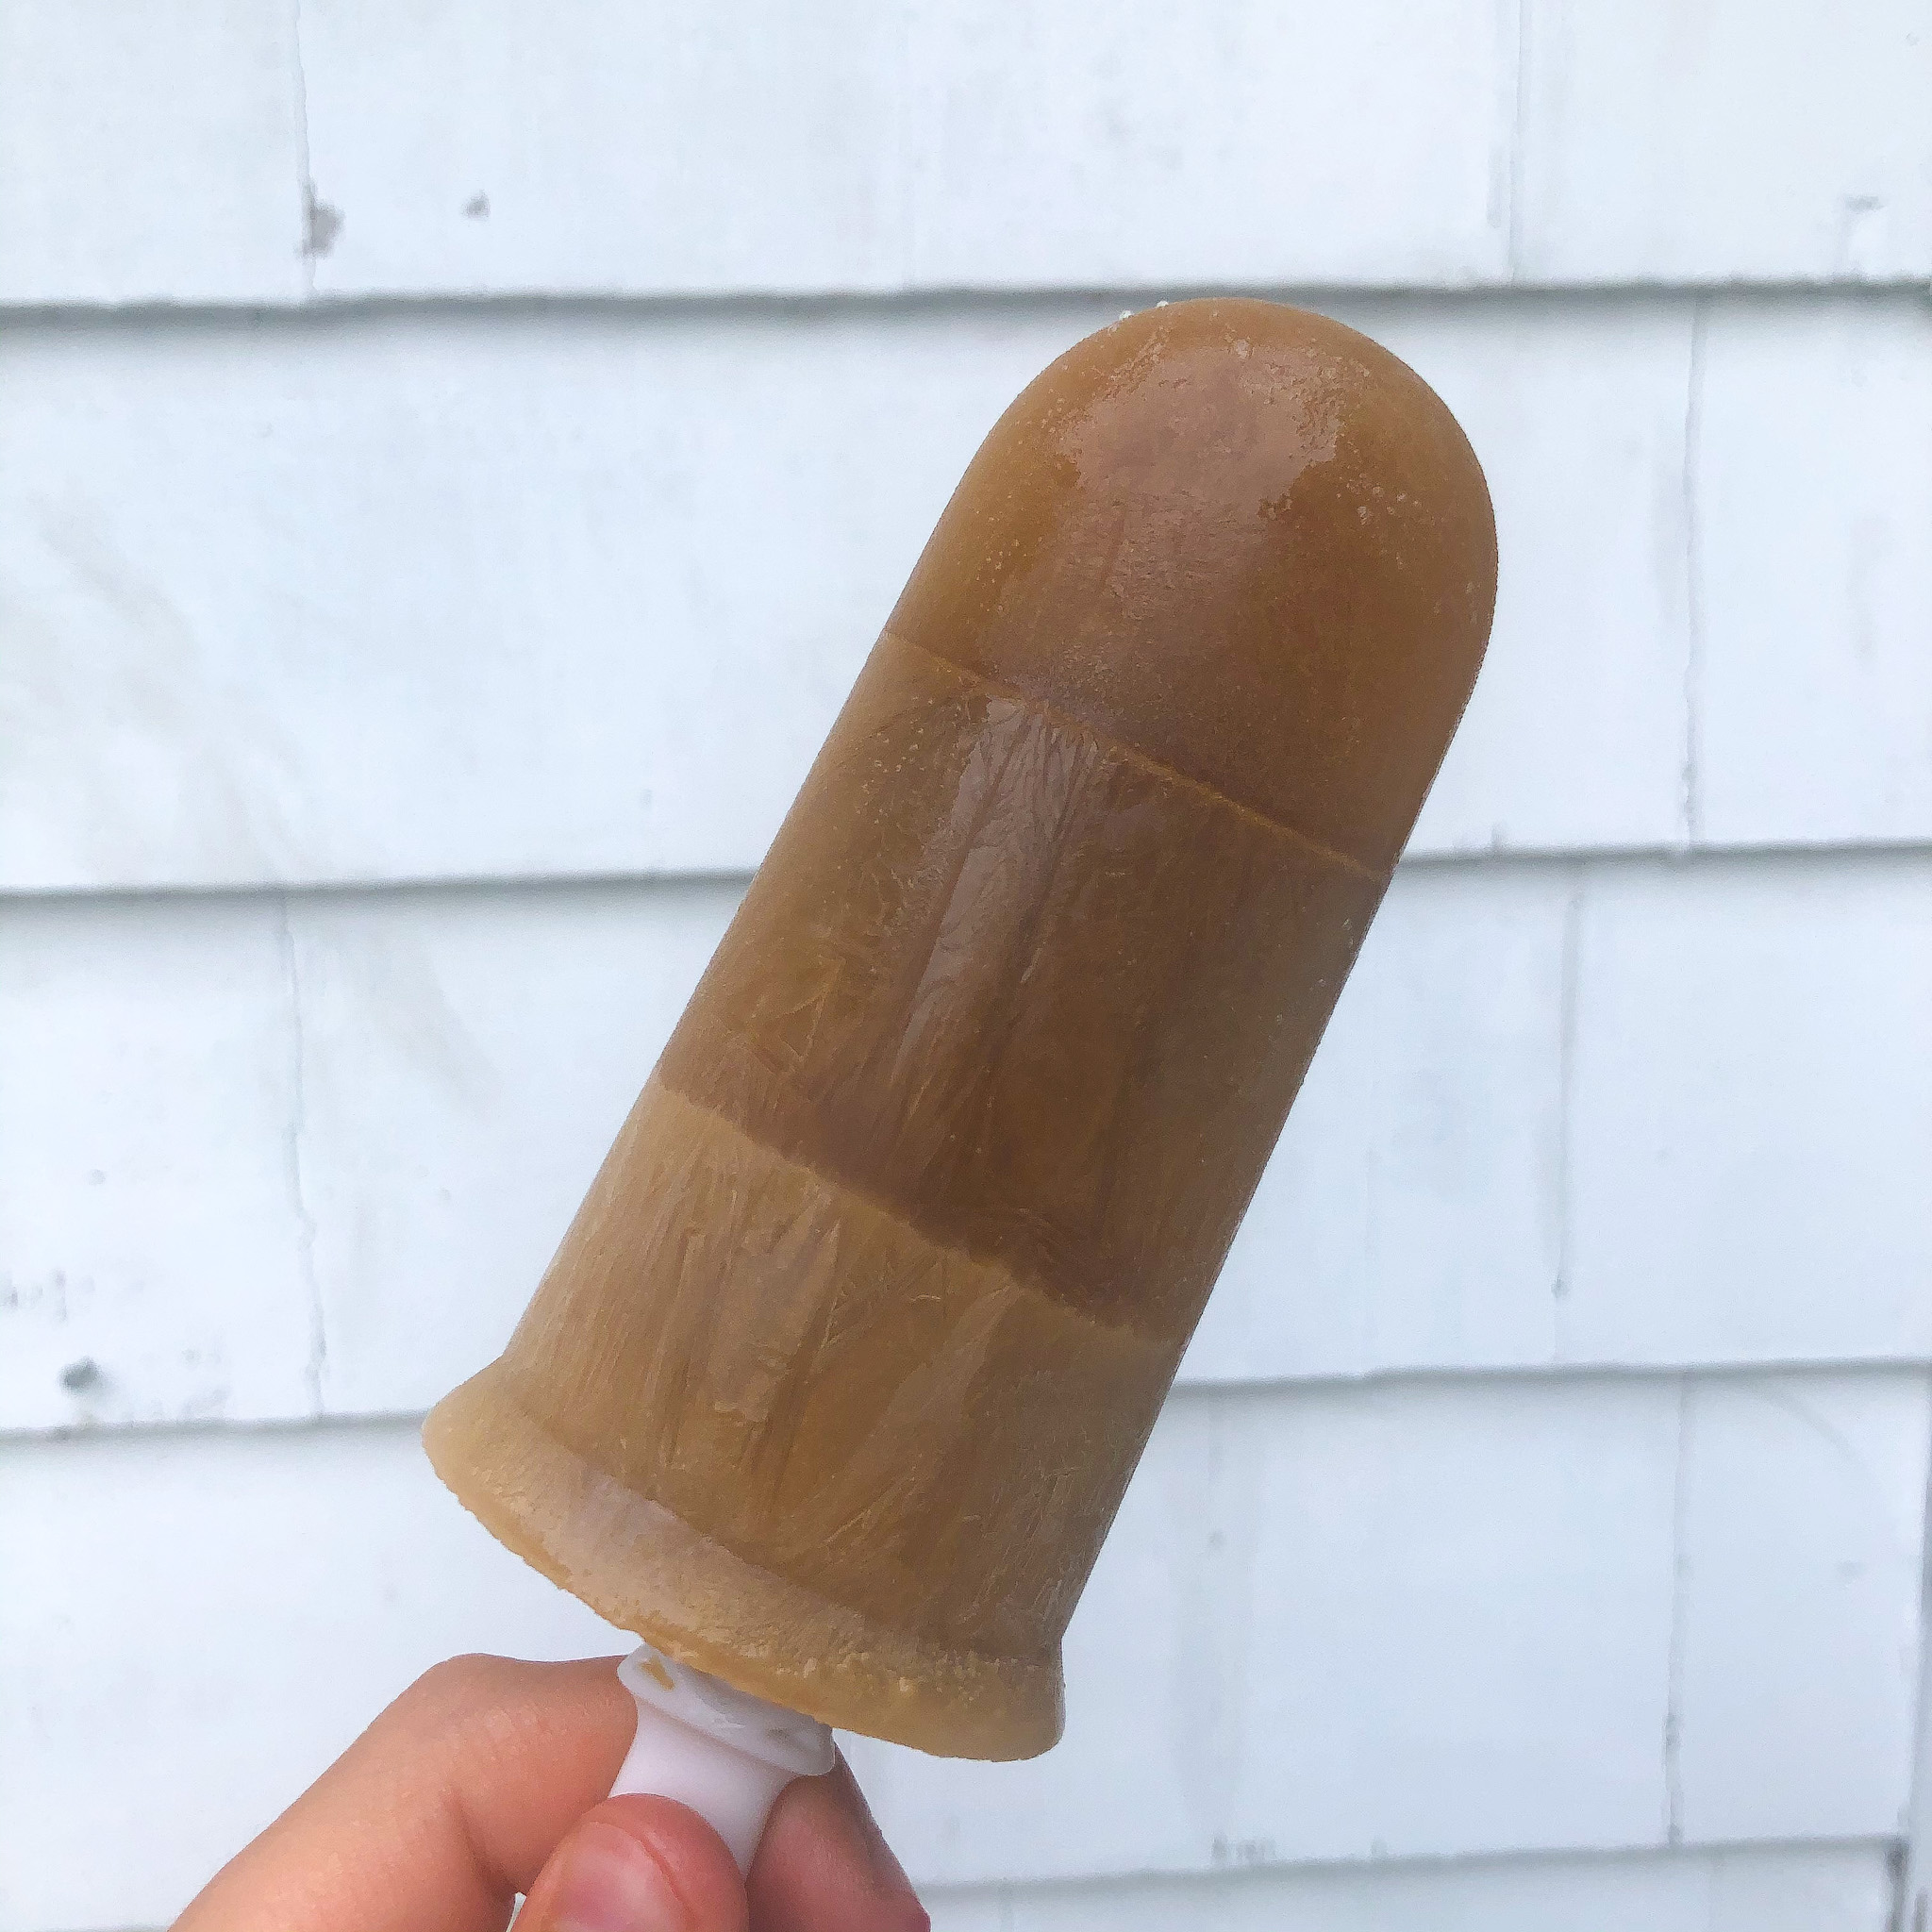 the finished cold brew popsicle